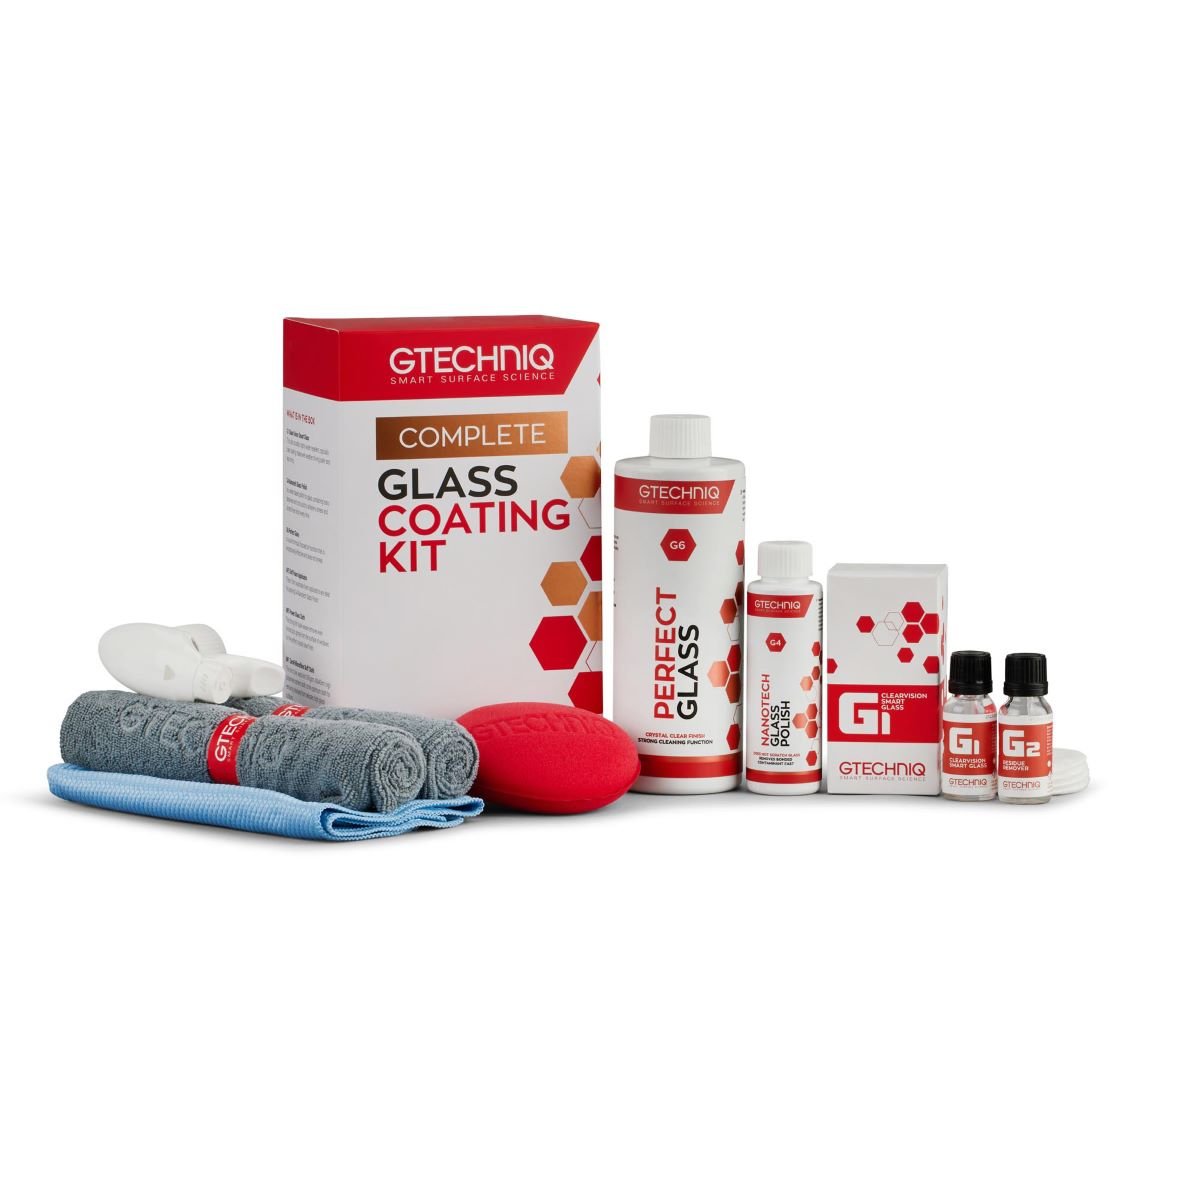 Complete Glass Coating Kit